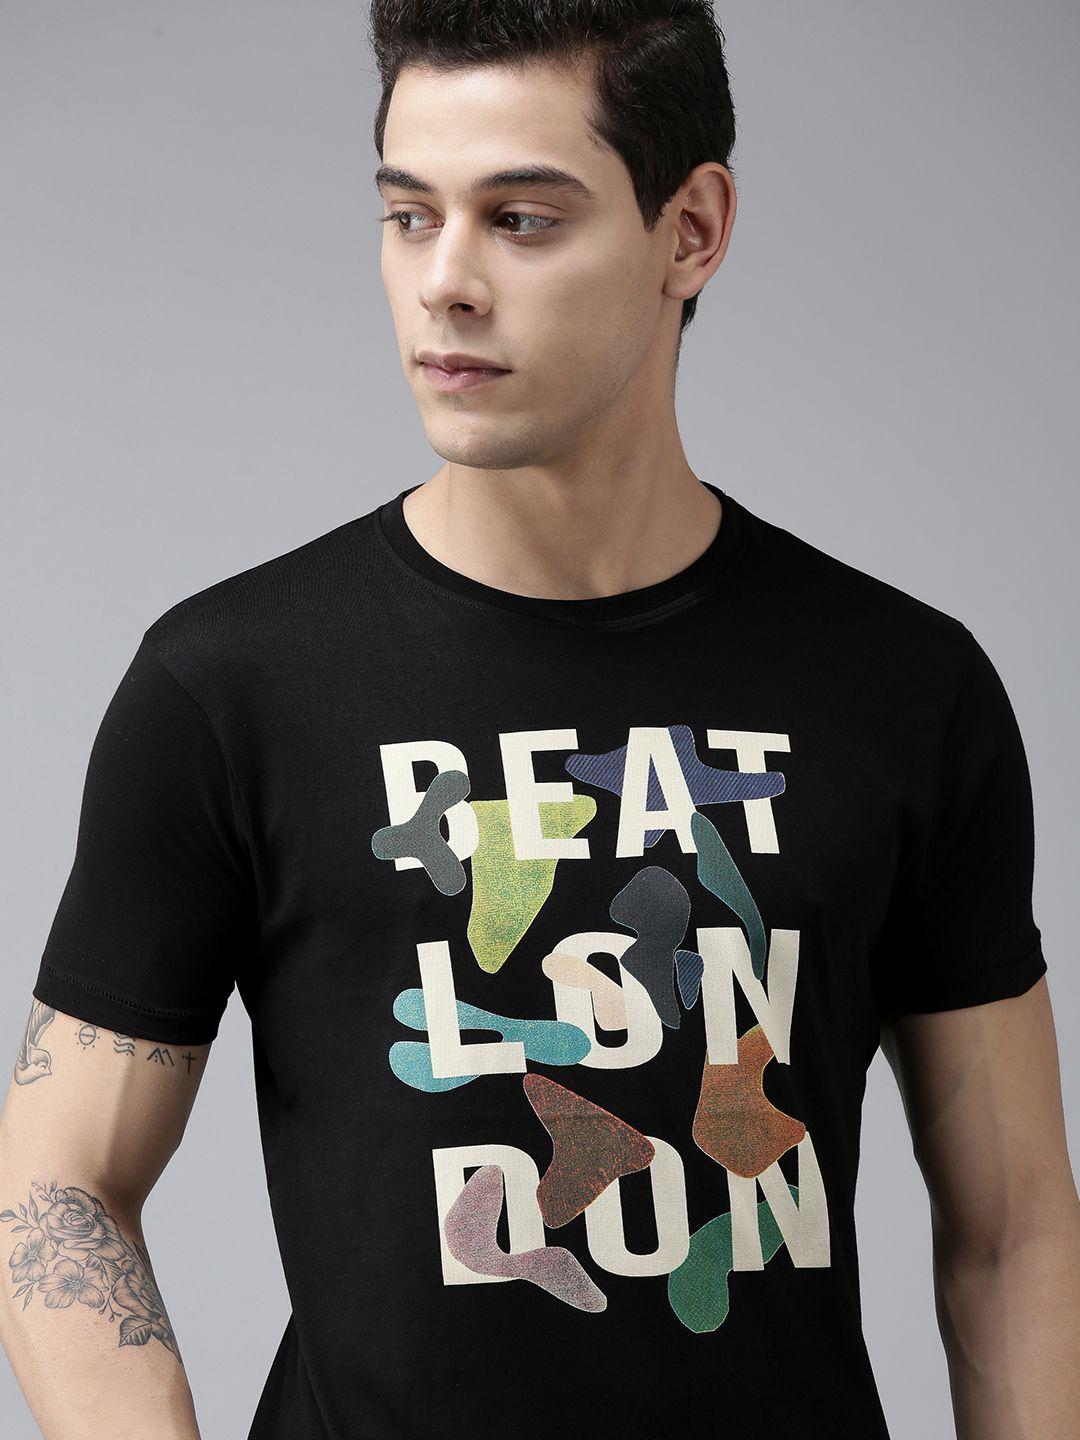 beat london by pepe jeans men black typography printed pure cotton slim fit t-shirt